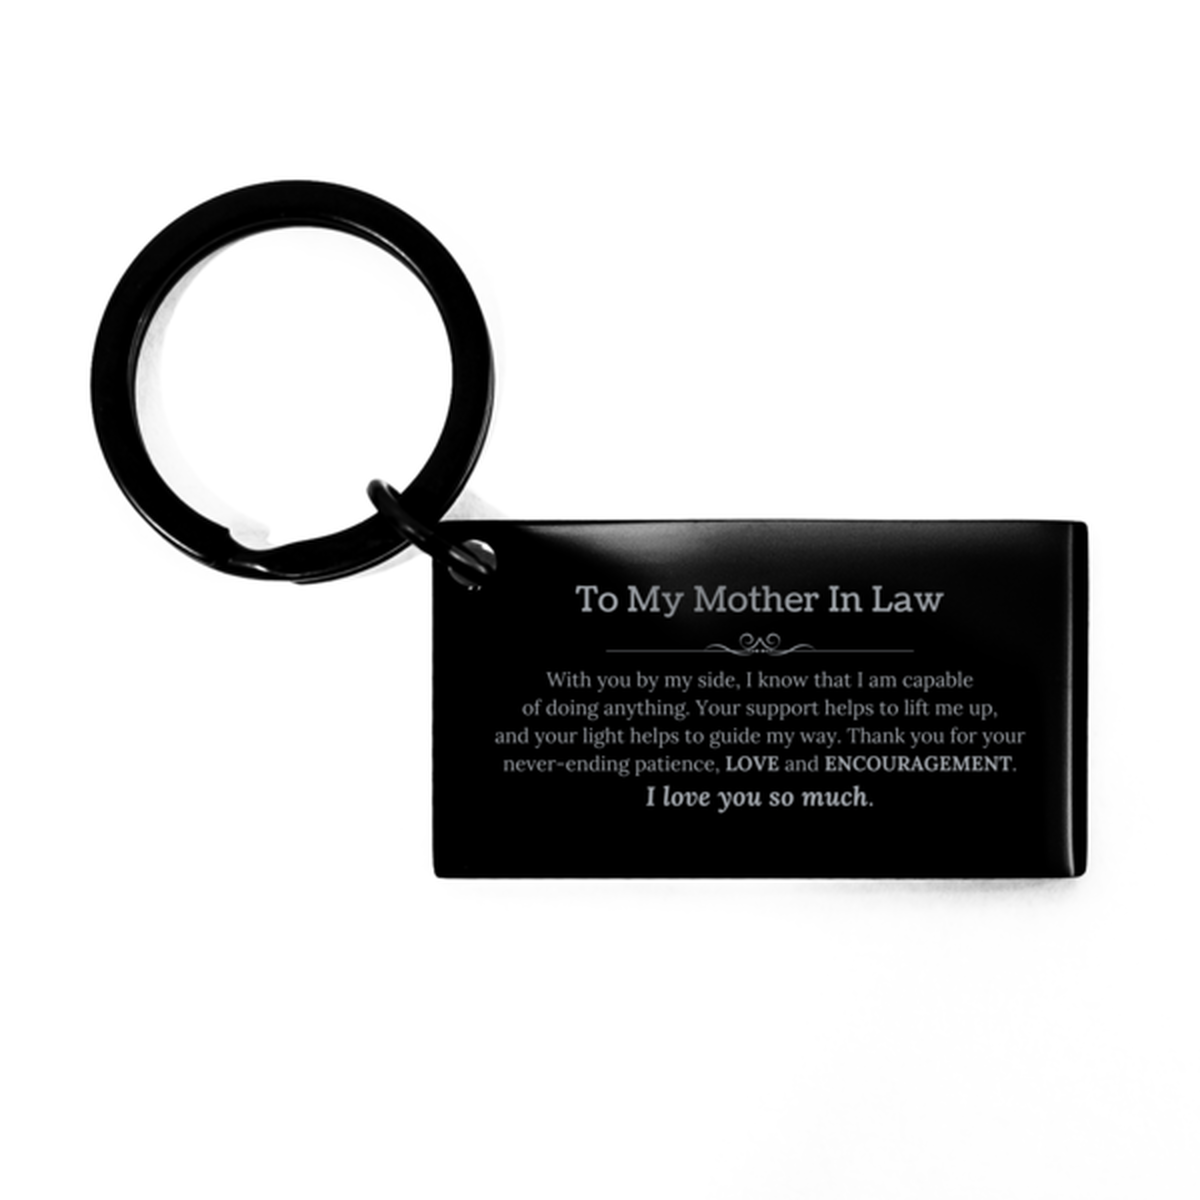 Appreciation Mother In Law Keychain Gifts, To My Mother In Law Birthday Christmas Wedding Keepsake Gifts for Mother In Law With you by my side, I know that I am capable of doing anything. I love you so much